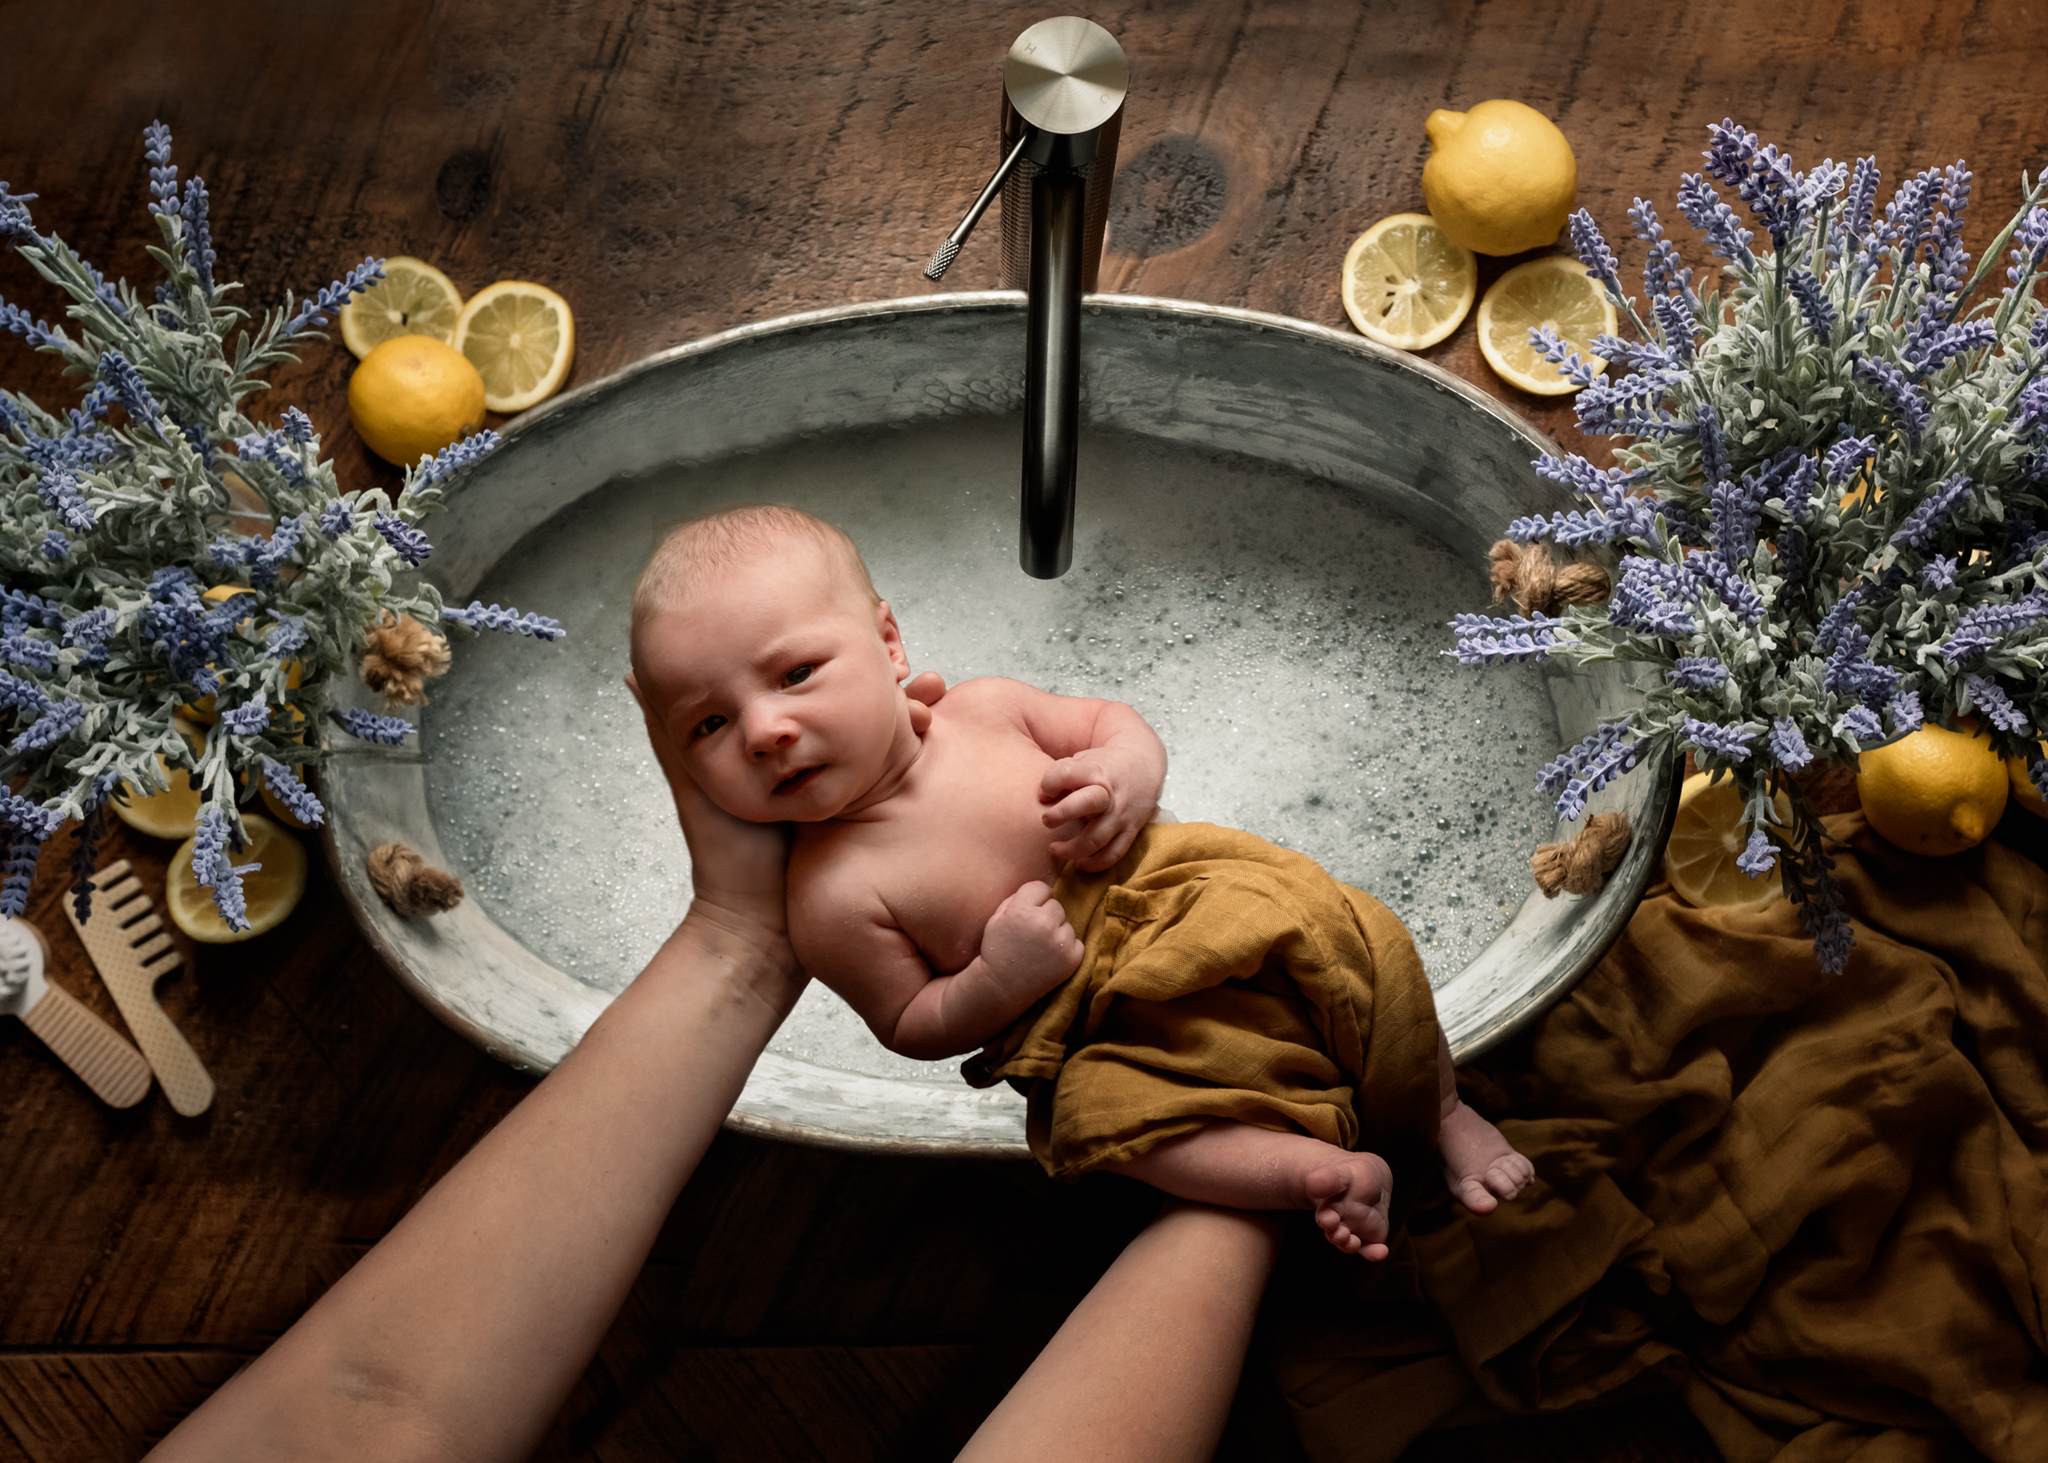 Baby over sink basin